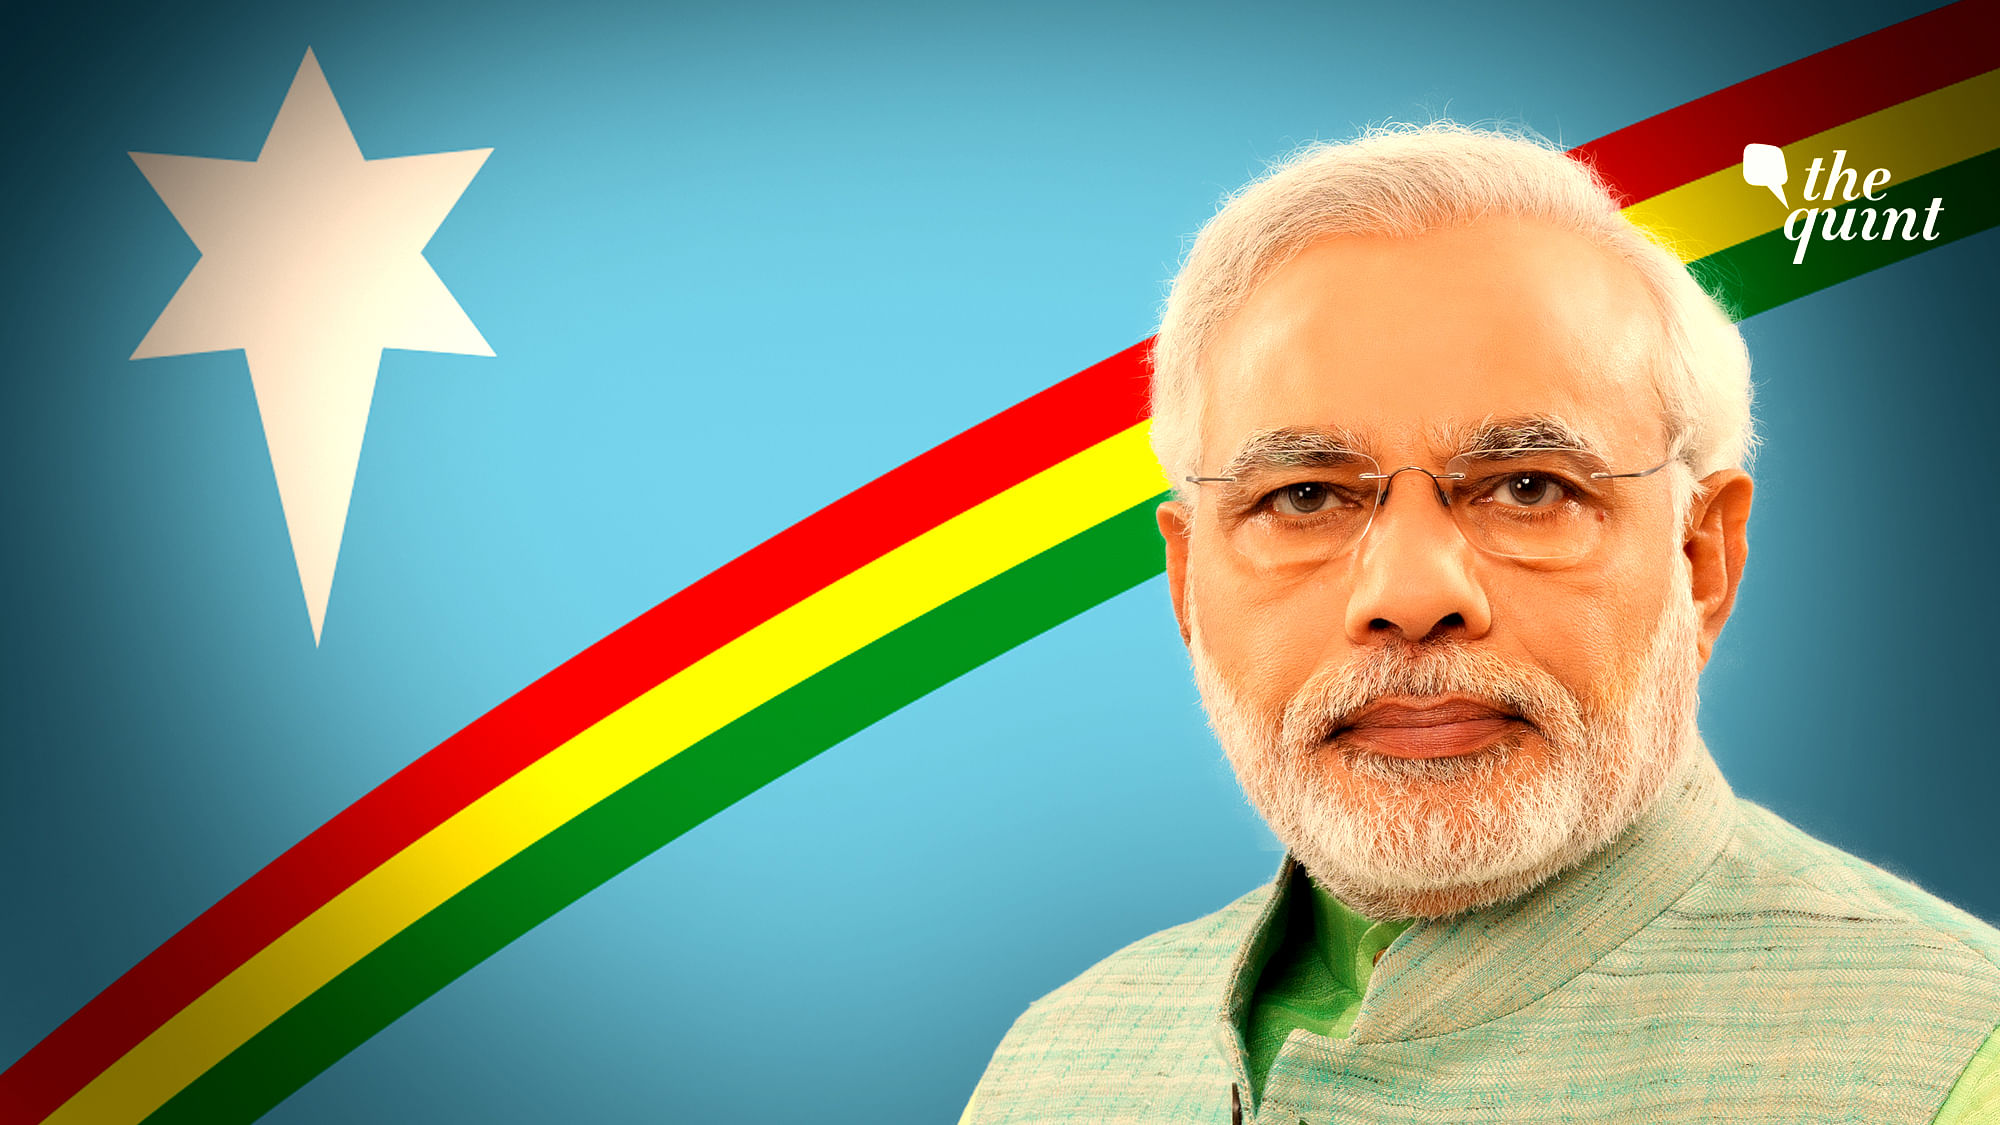 Image of PM Modi and NSCN flag used for representational purposes.